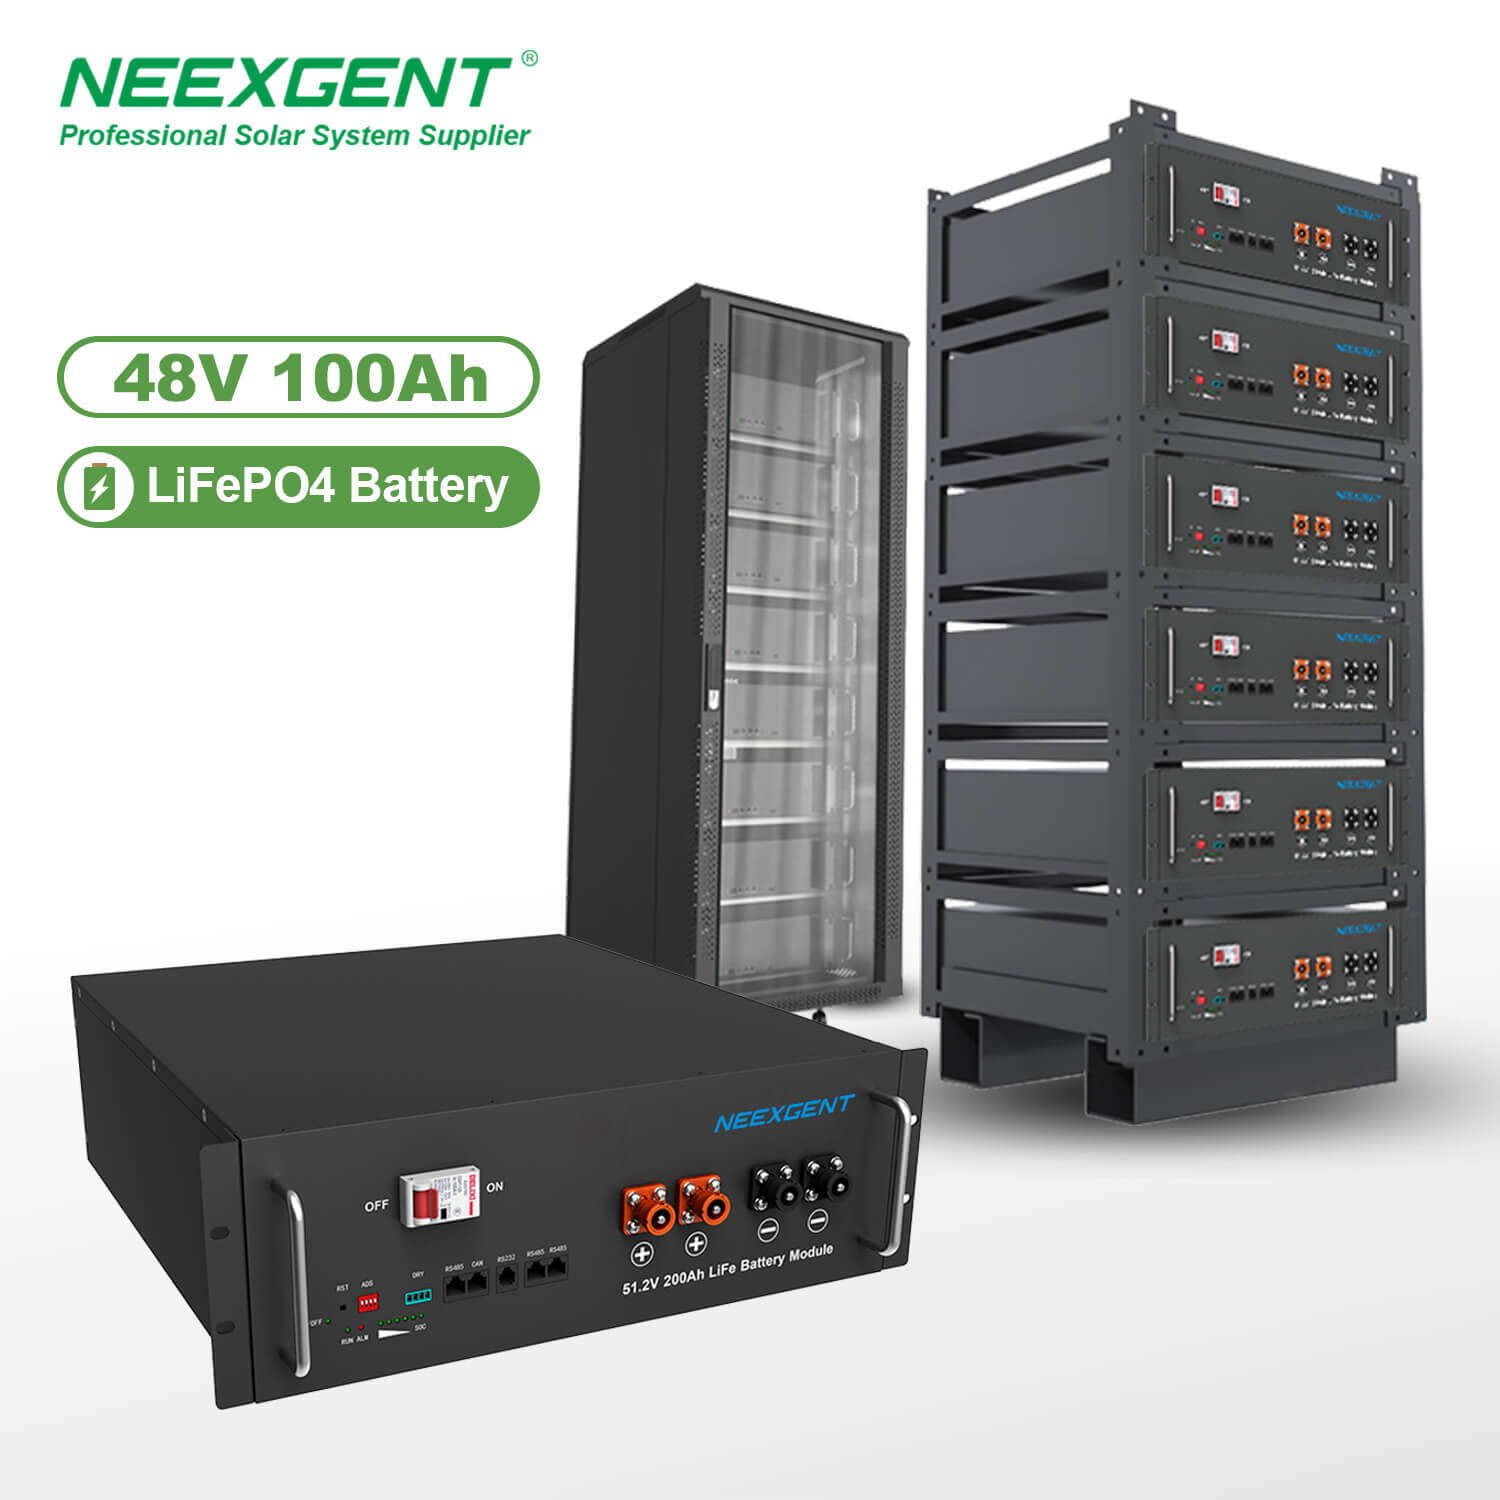 Neexgent Lithium Ion Battery Pack 48v 100ah Lifepo4 Battery For Backup Power/ups/solar Energy Storage